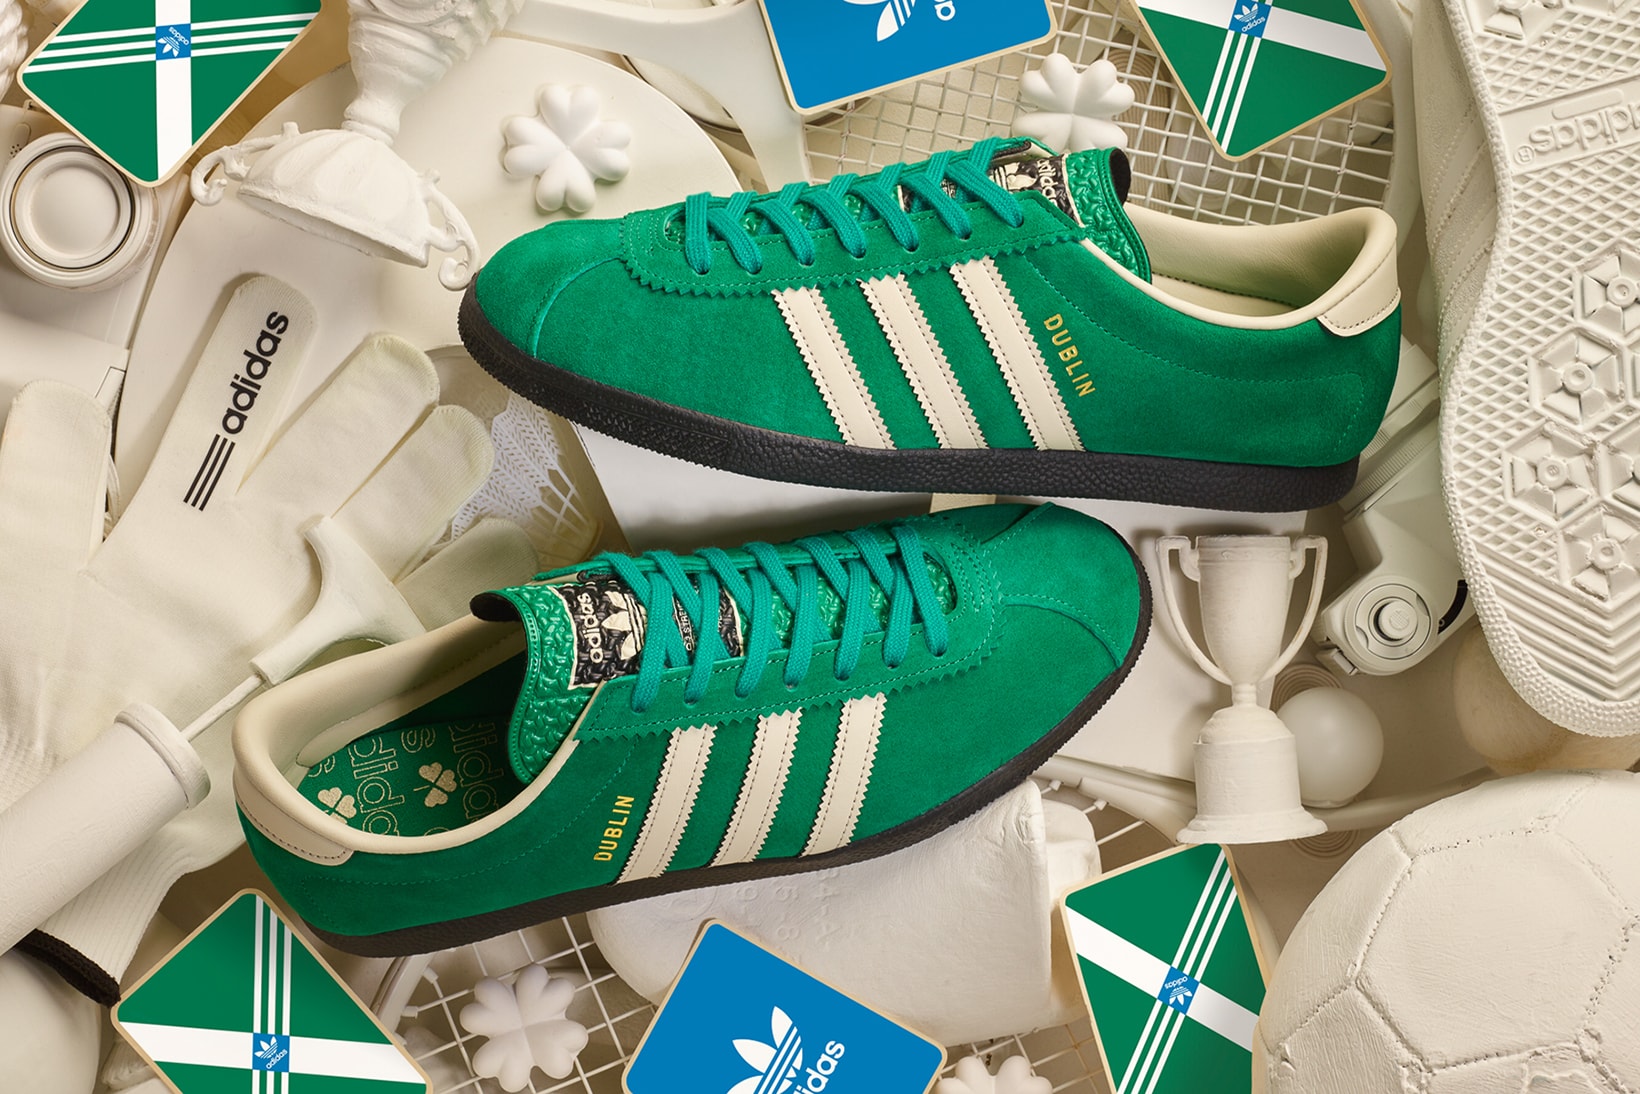 adidas Originals Archive Dublin St Patricks Day size Exclusive march 17 2018 release date info drop green sneakers shoes footwear